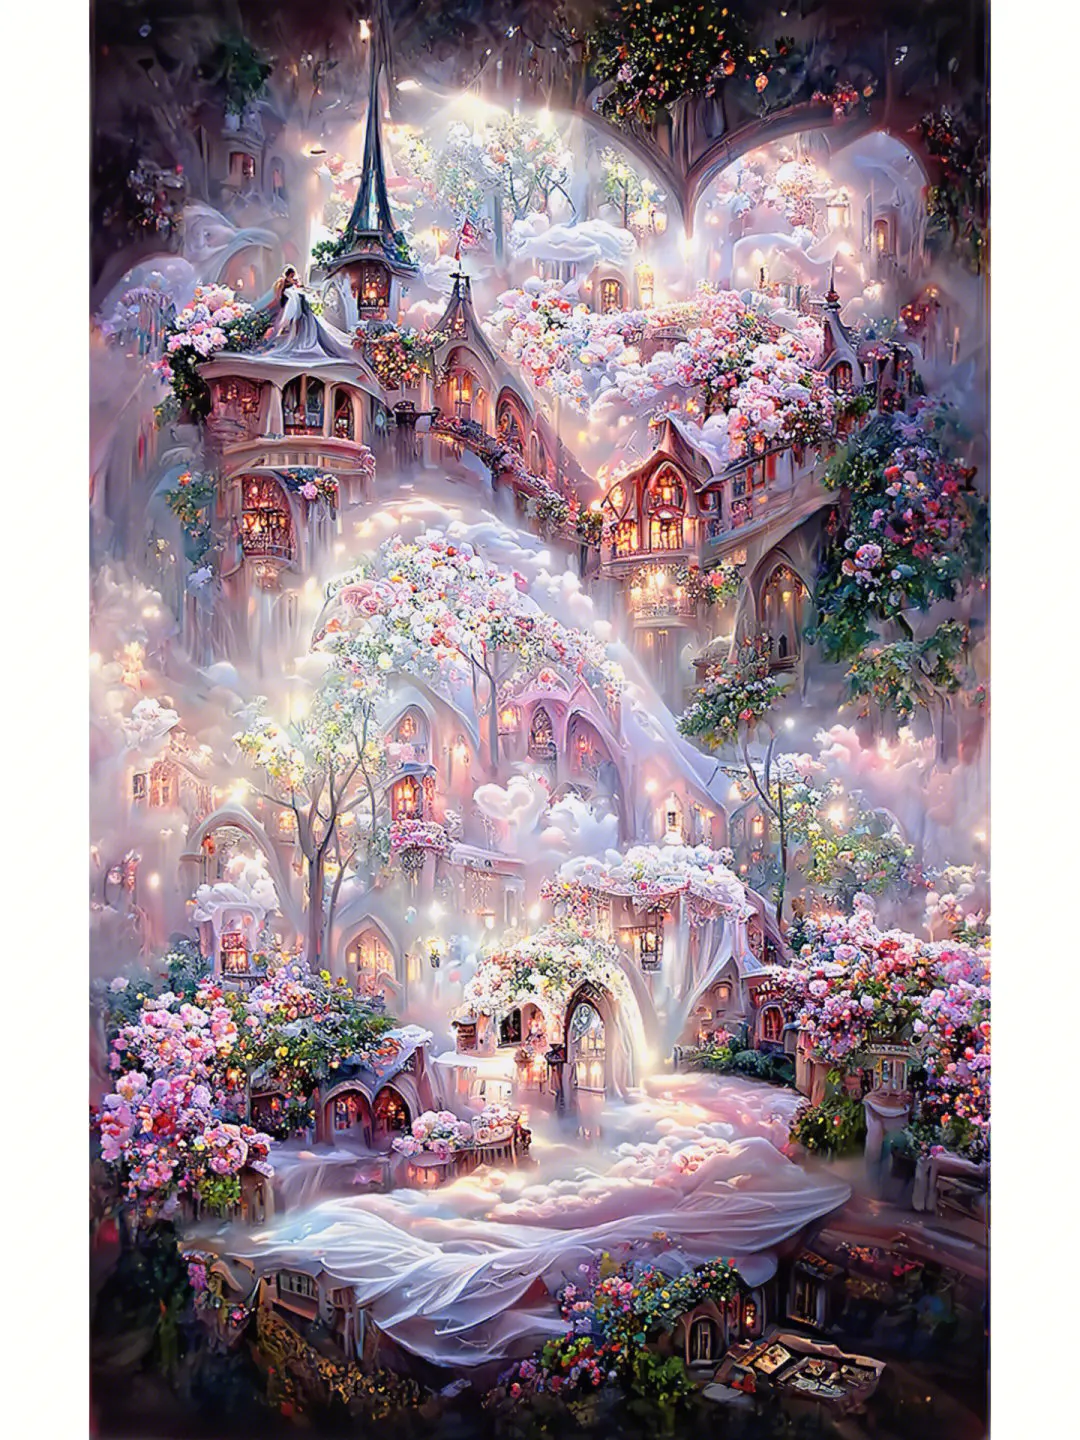 AB Dill Painting Diamond Paintings Castle Diamonds for Crafts Mosaic  Embroidery Full Accessories 5d Art Kit Fantasy Decorative - AliExpress